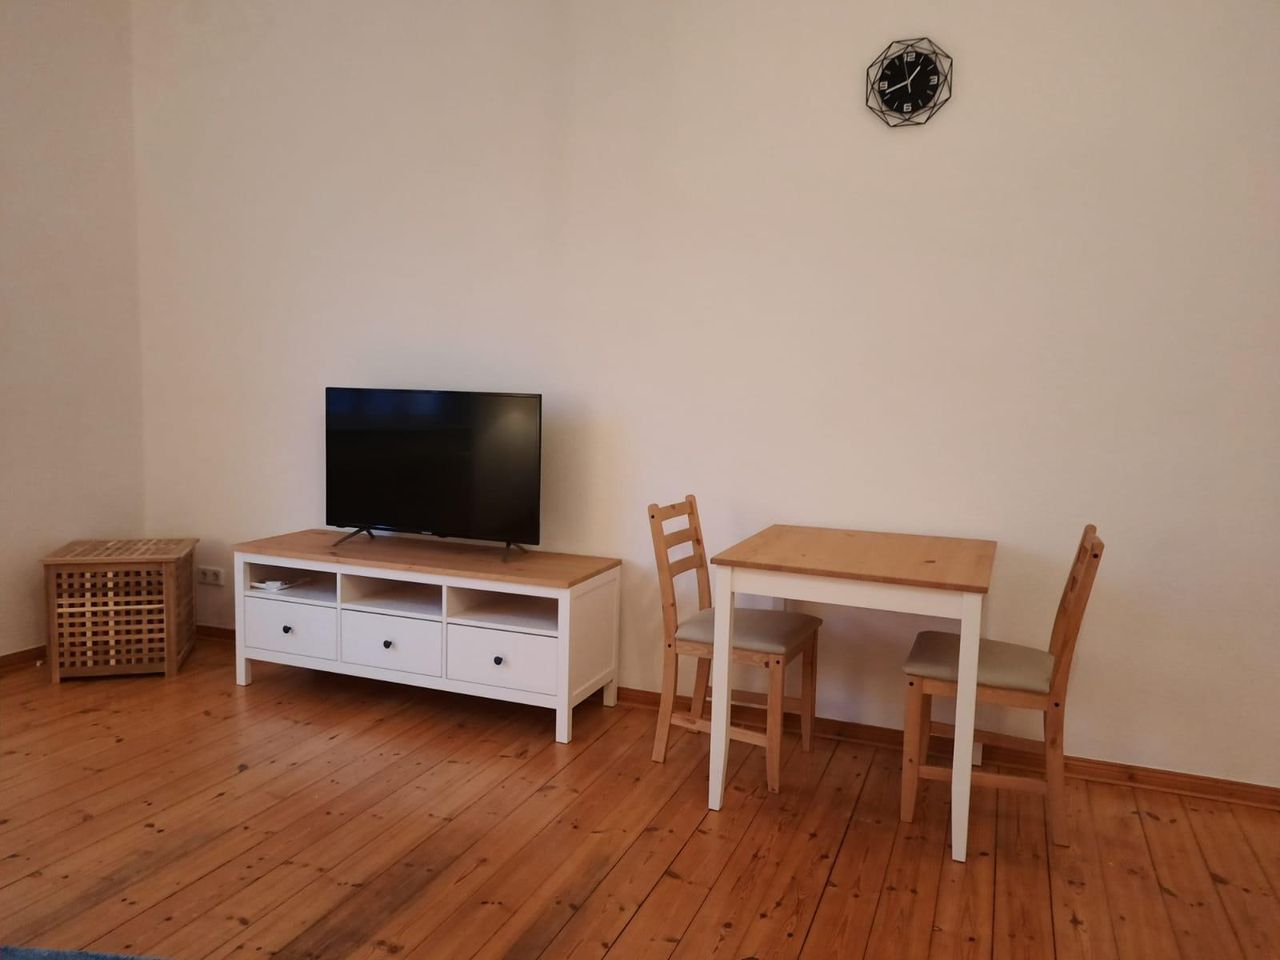 Completely new furnished, bright 2-Z. Old building on the 2nd floor with balcony, central location Schöneweide near the Spree river